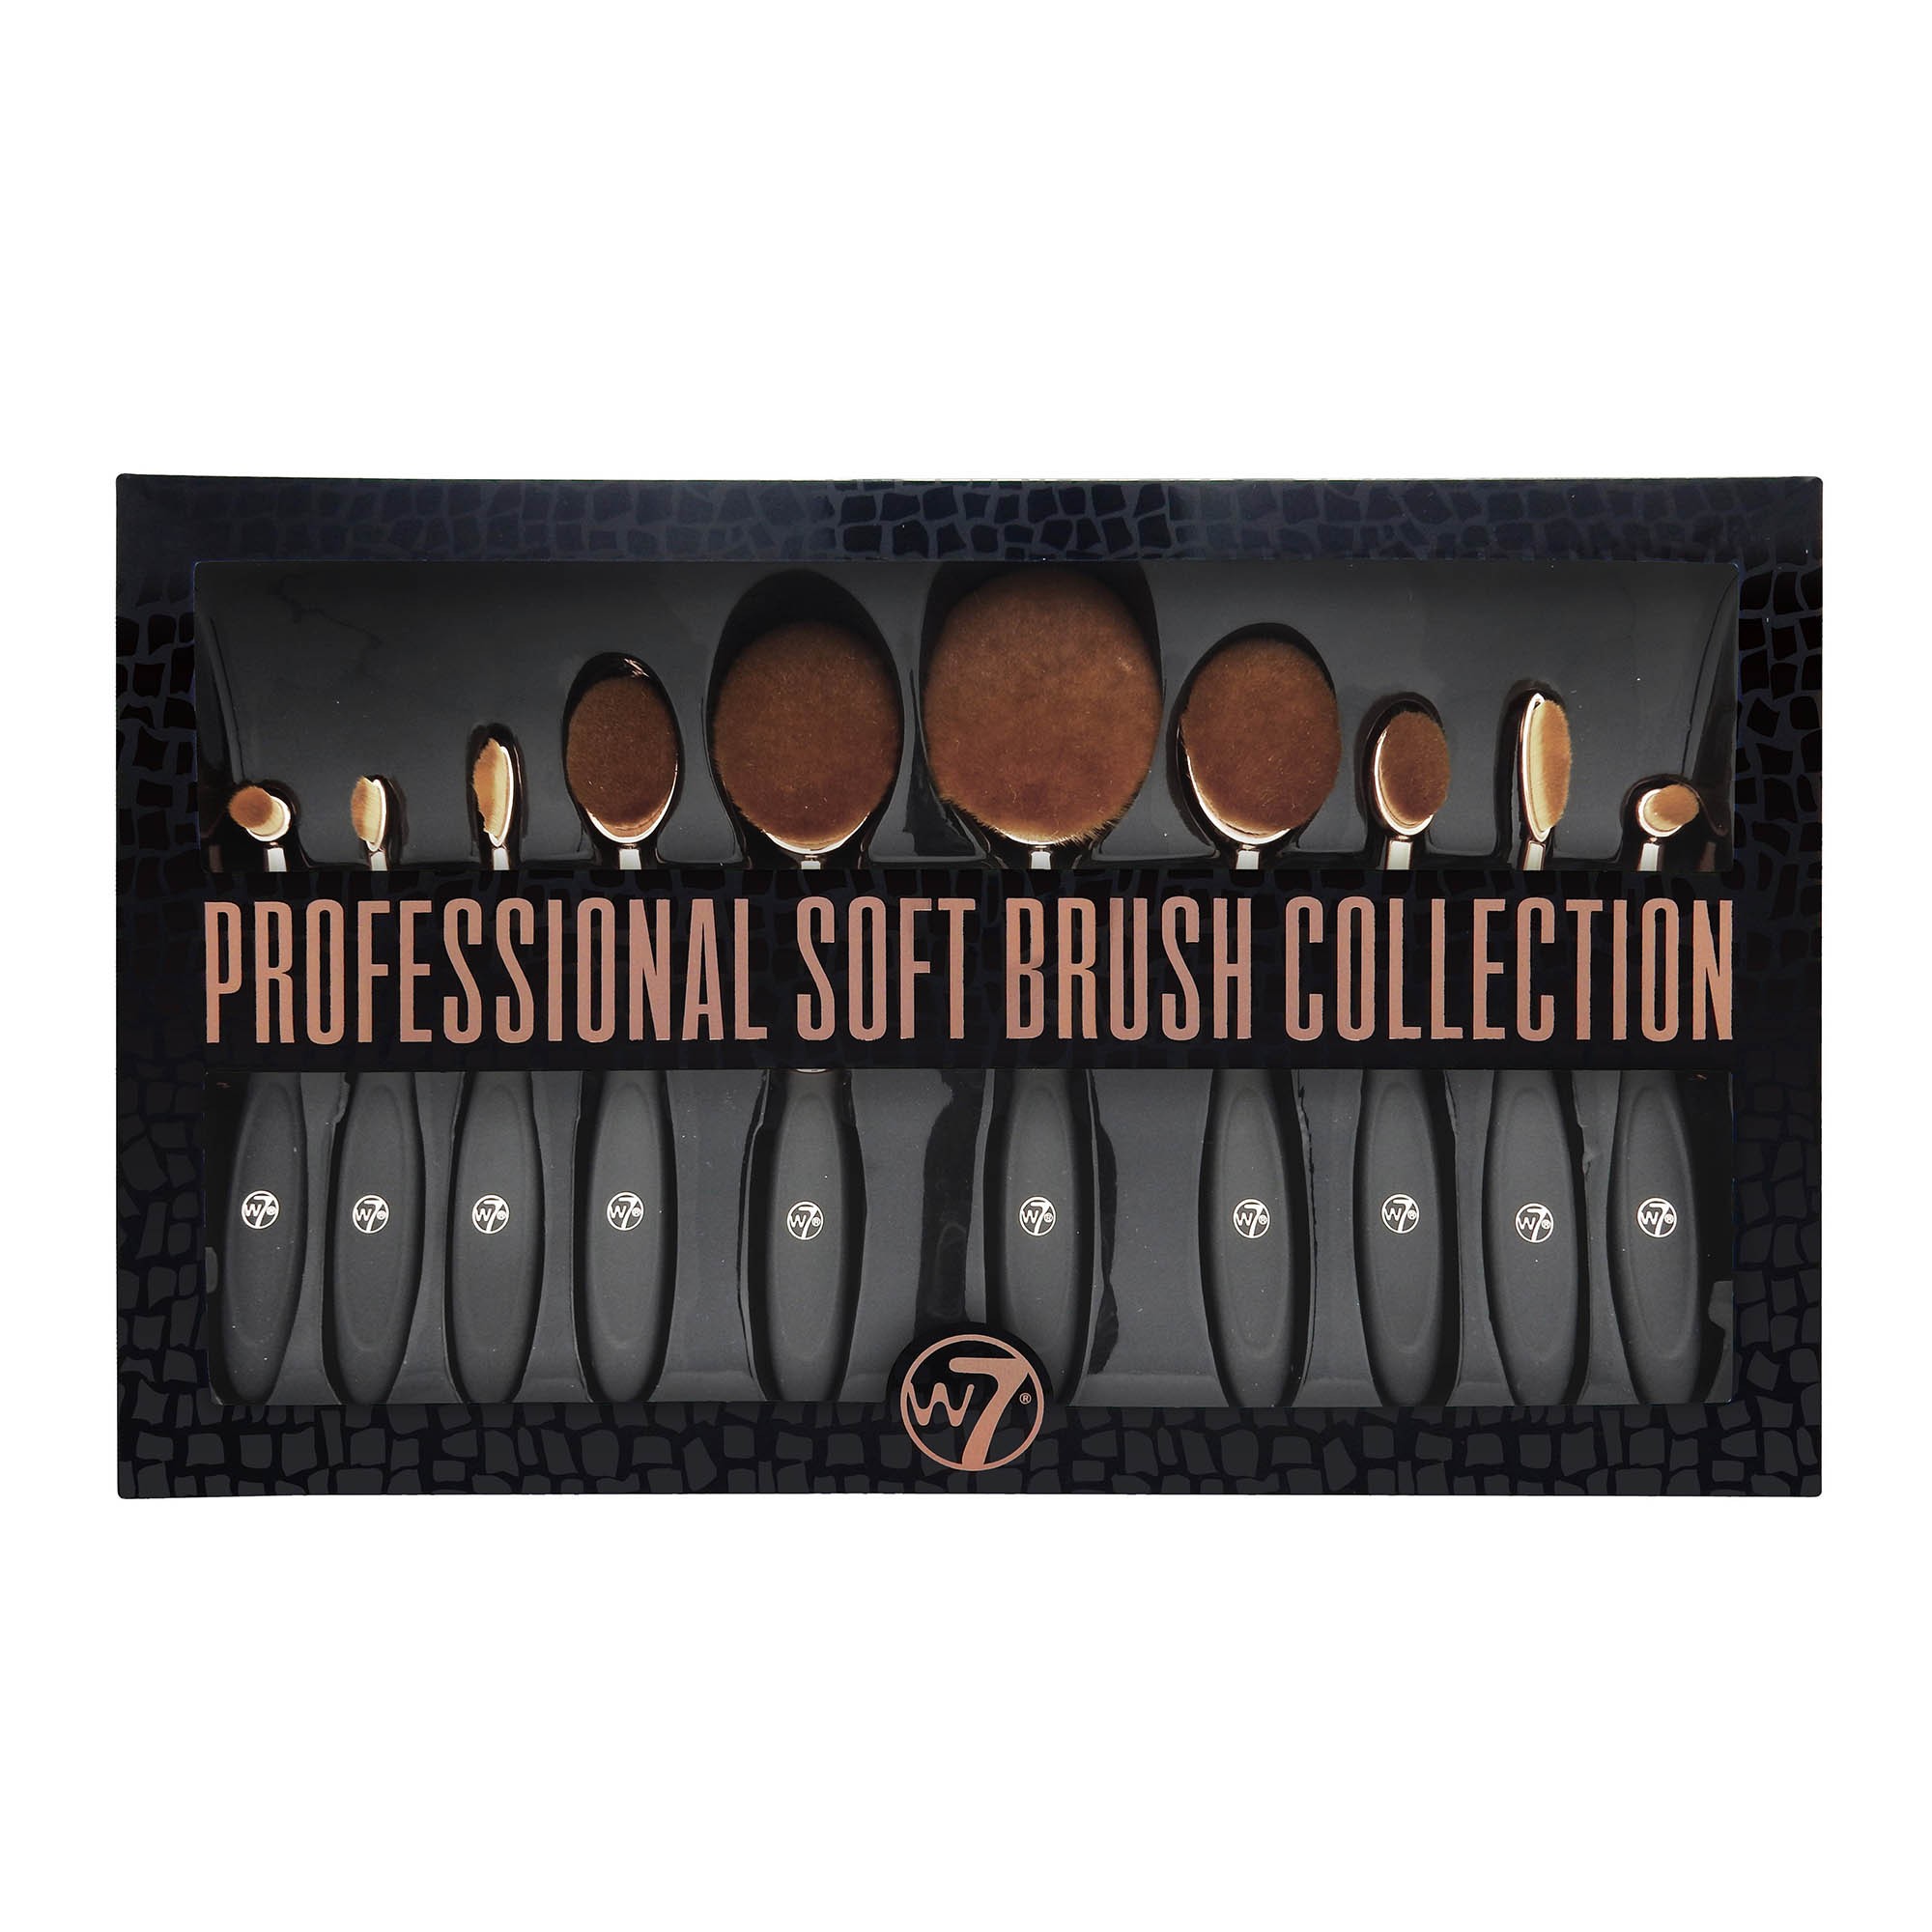 Ovales 10-Teiliges Pinsel-Set - Professional Soft Brush Collection